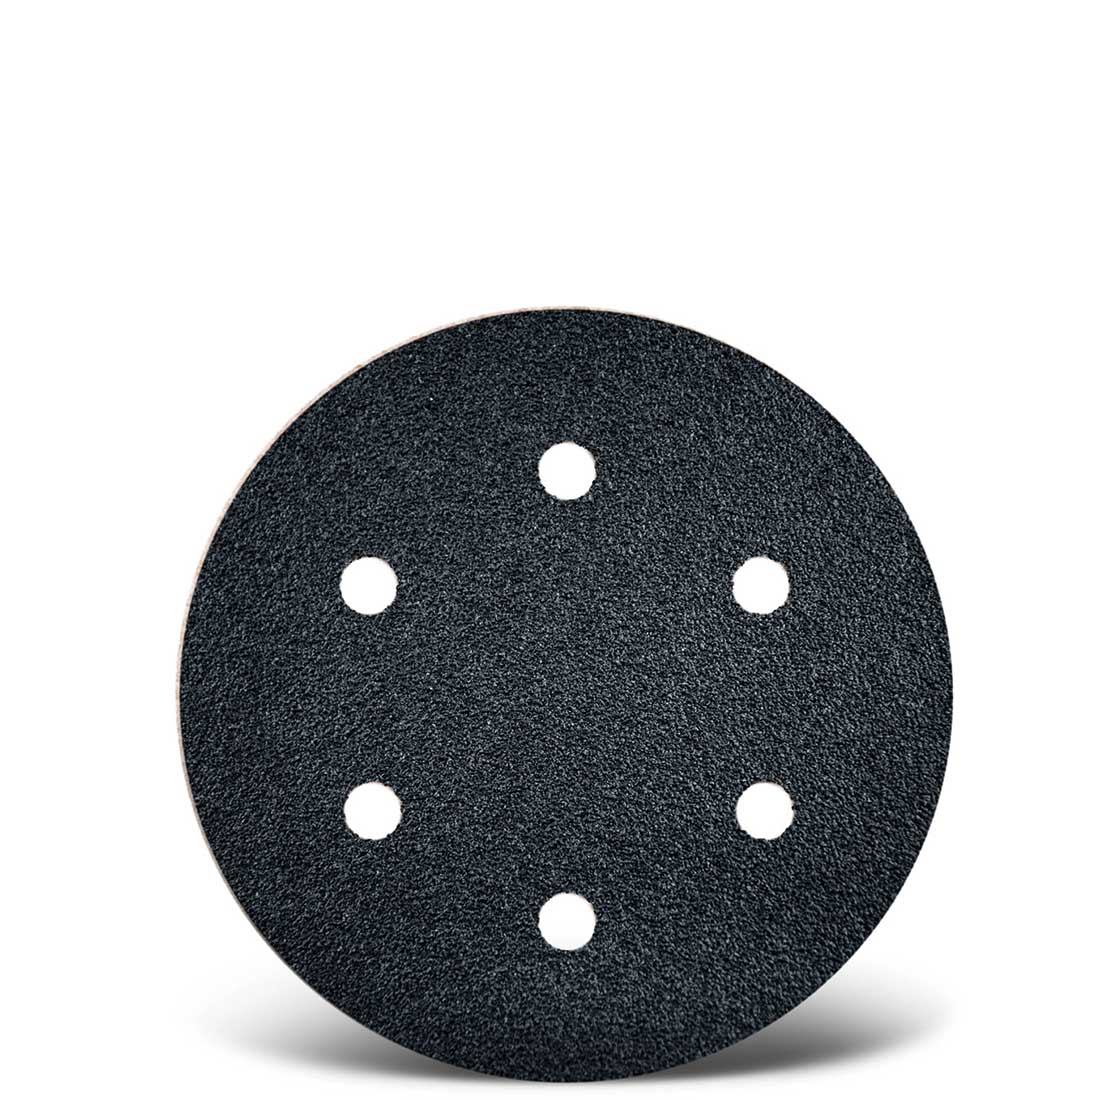 MENZER hook & loop sanding discs for drywall sanders, G16, Ø 225 mm / 6 hole / silicon carbide